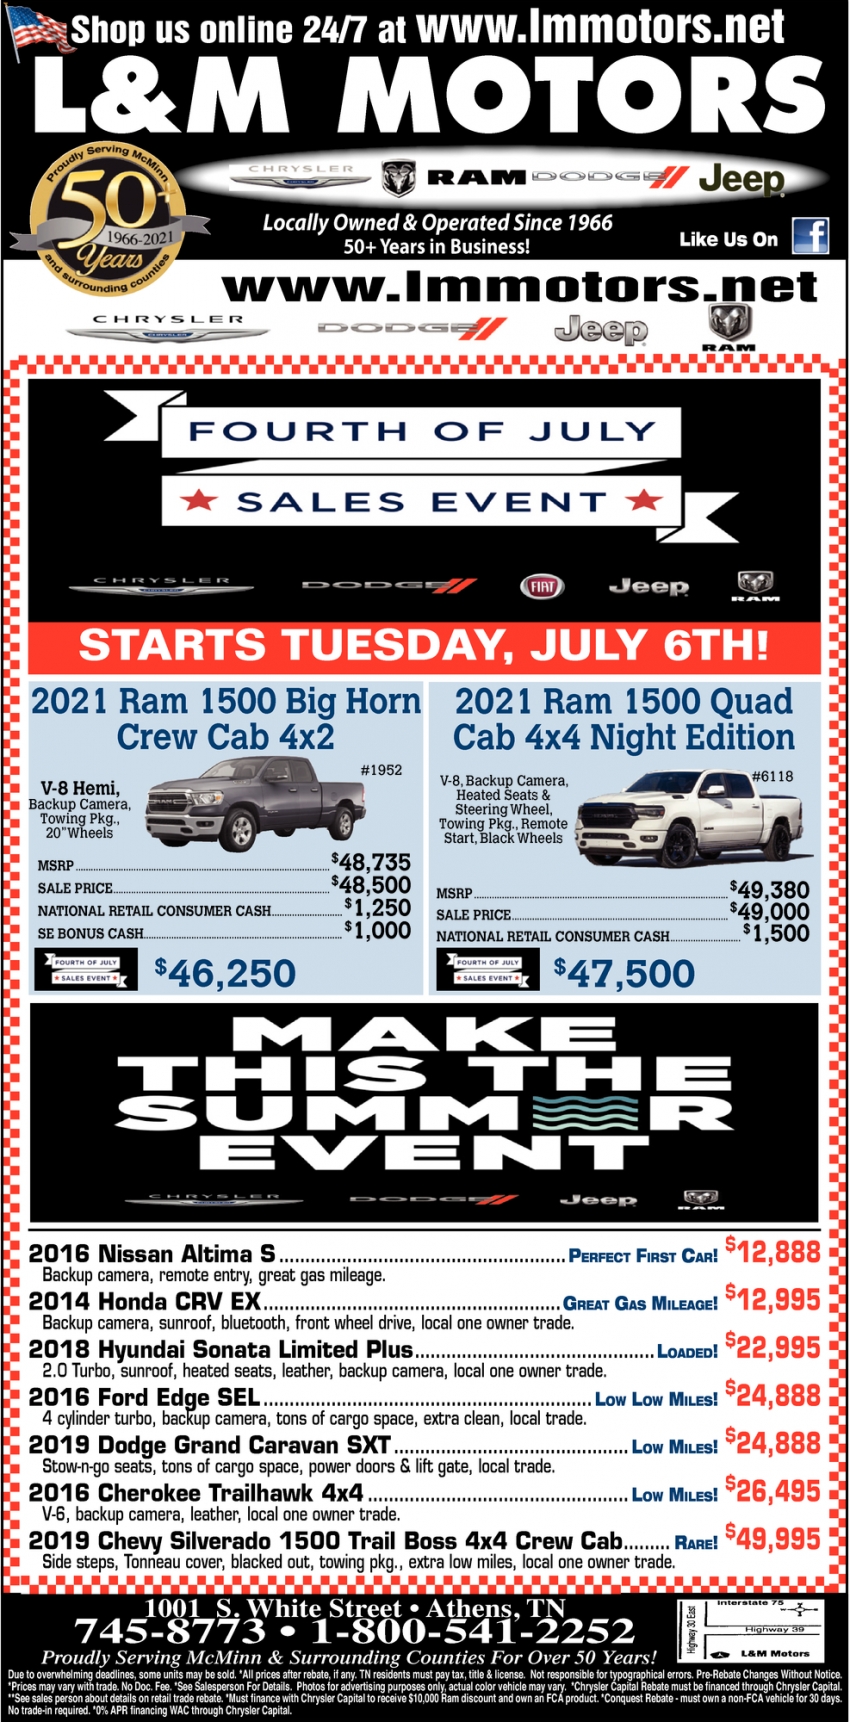 Fourth Of July Sales Event